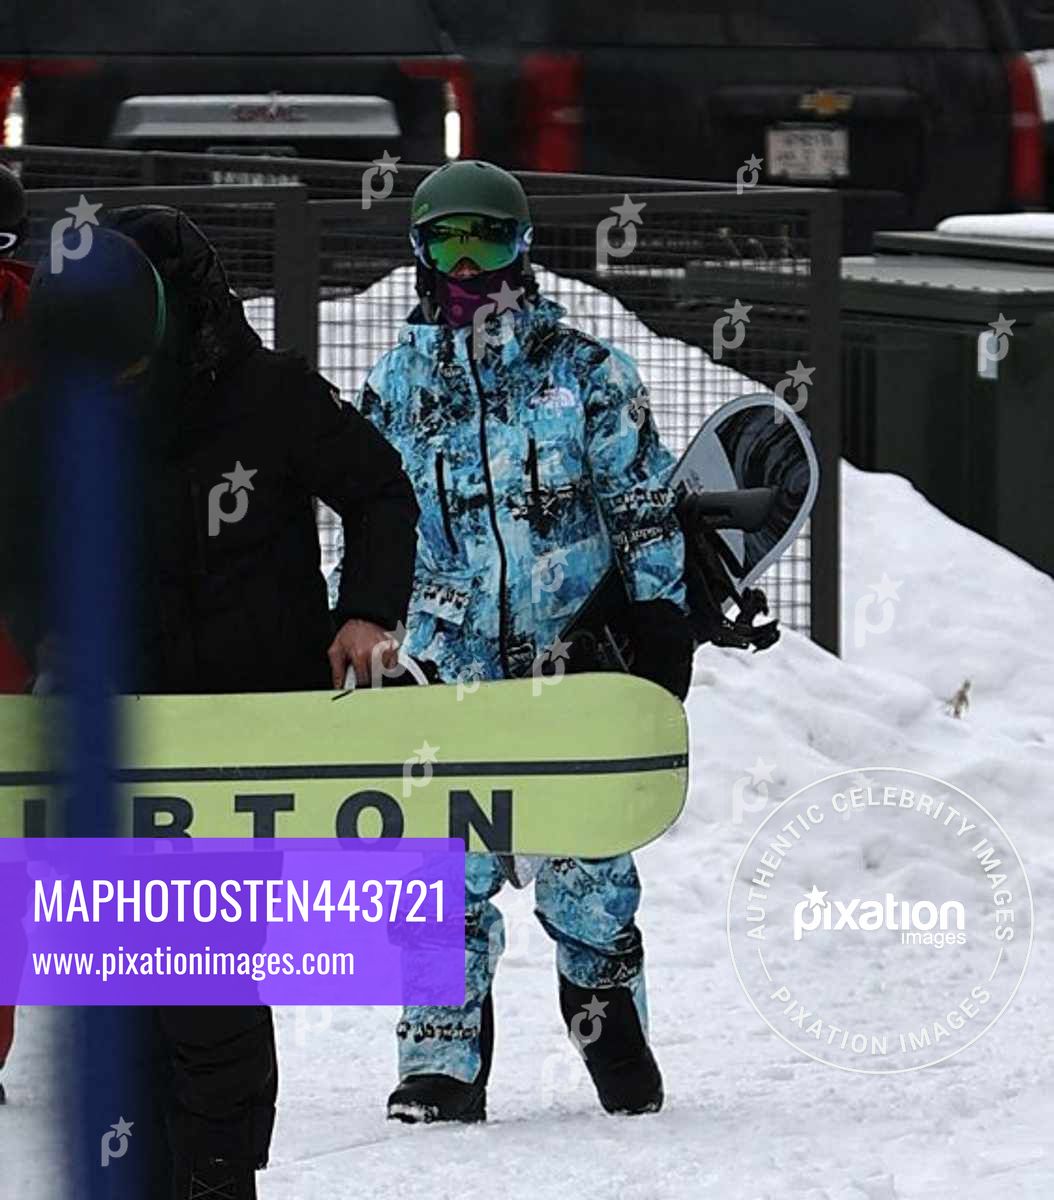 Justin Bieber dressed in all blue camouflage arrives at Buttermilk Mountain to go snow boarding with friends in Aspen, Colorado